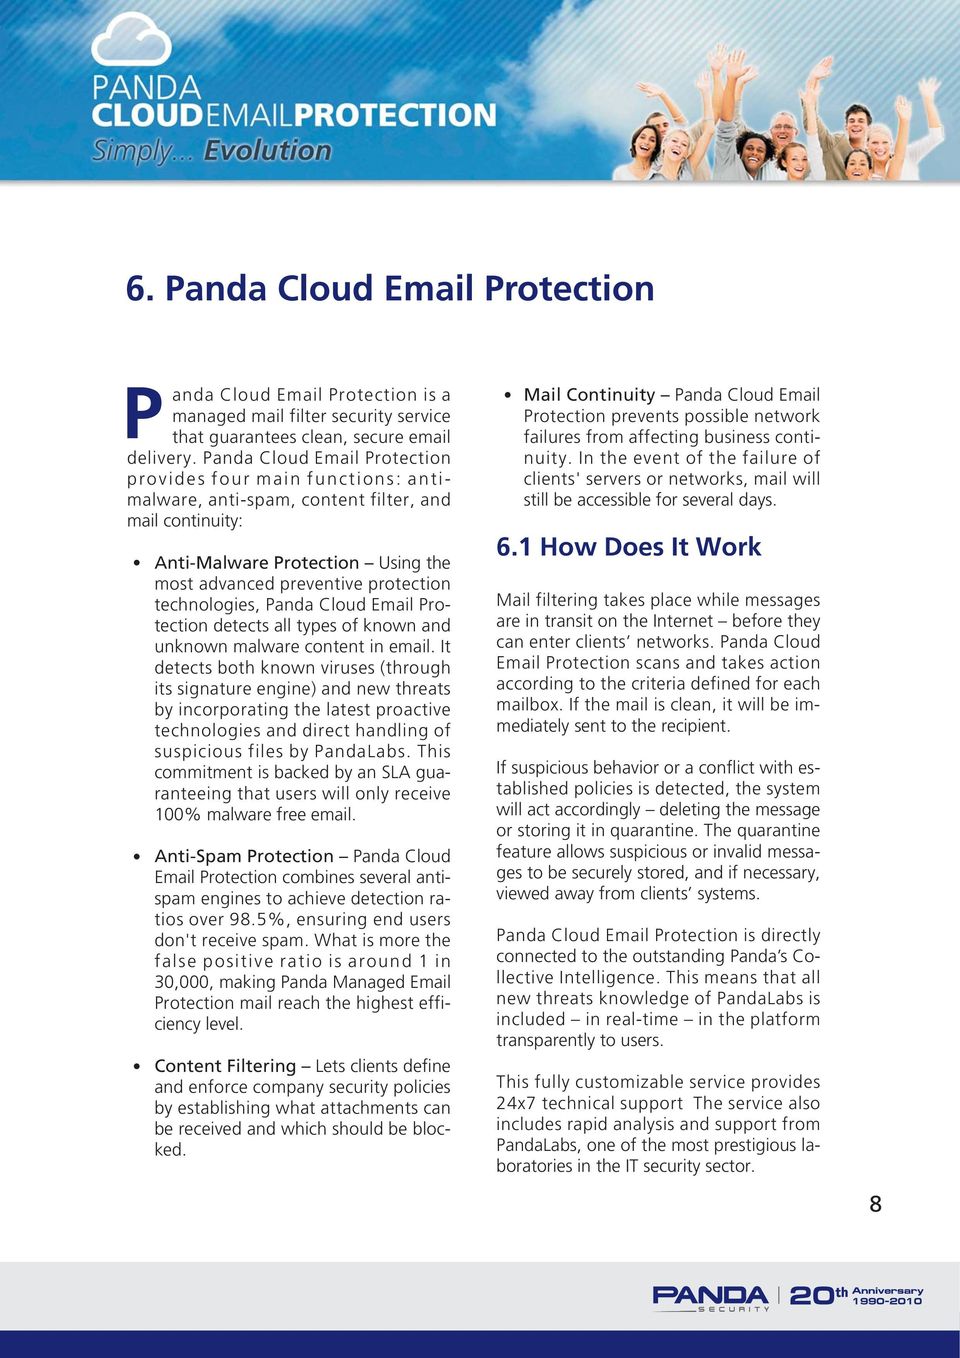 technologies, Panda Cloud Email Protection detects all types of known and unknown malware content in email.